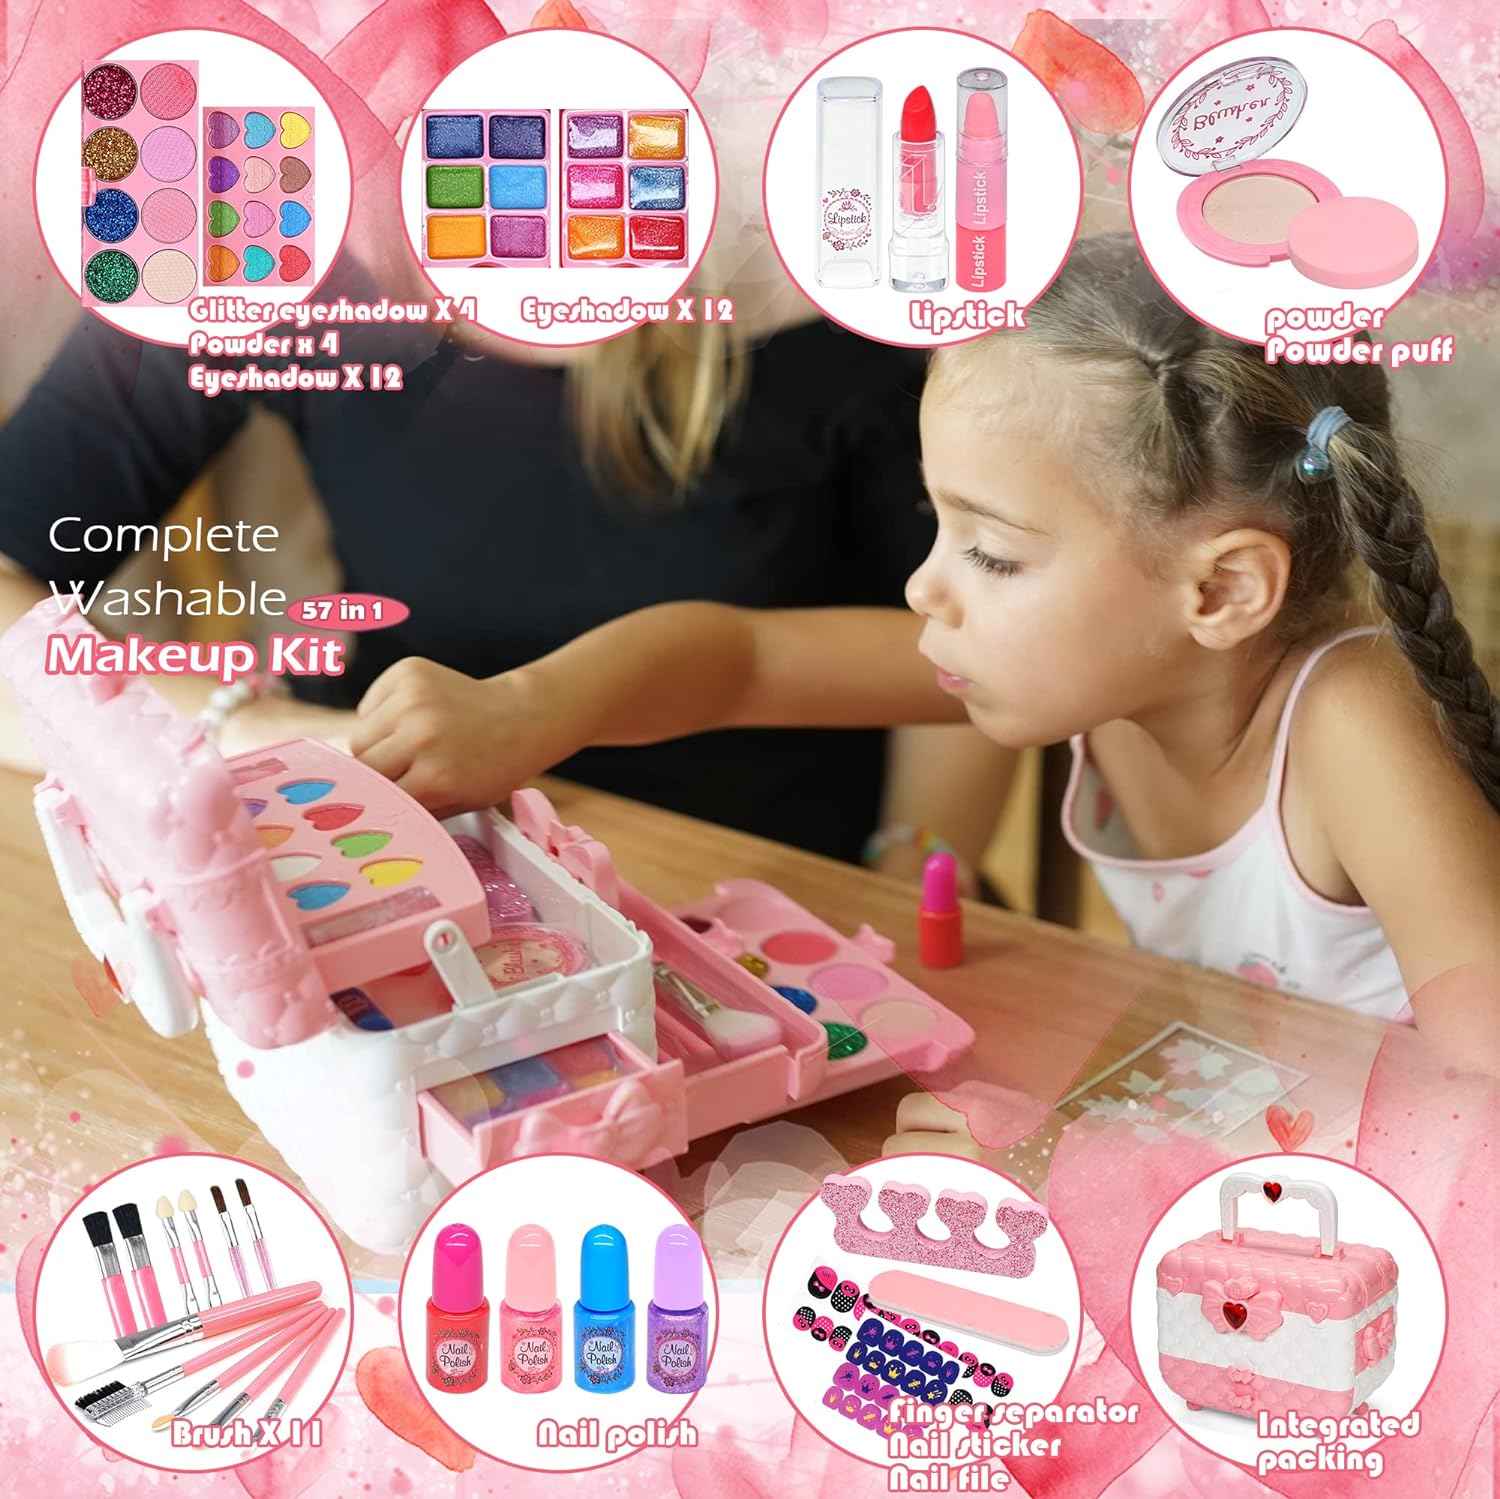 Kids Makeup Kit for Girl - Kids Makeup Kit Toys for Girls,Play Real Makeup Girls Toys, Washable Make Up for Little Girls, Non ToxicToddlers Pretend Cosmetic Kits,Age3-12 Year Old Children Gift